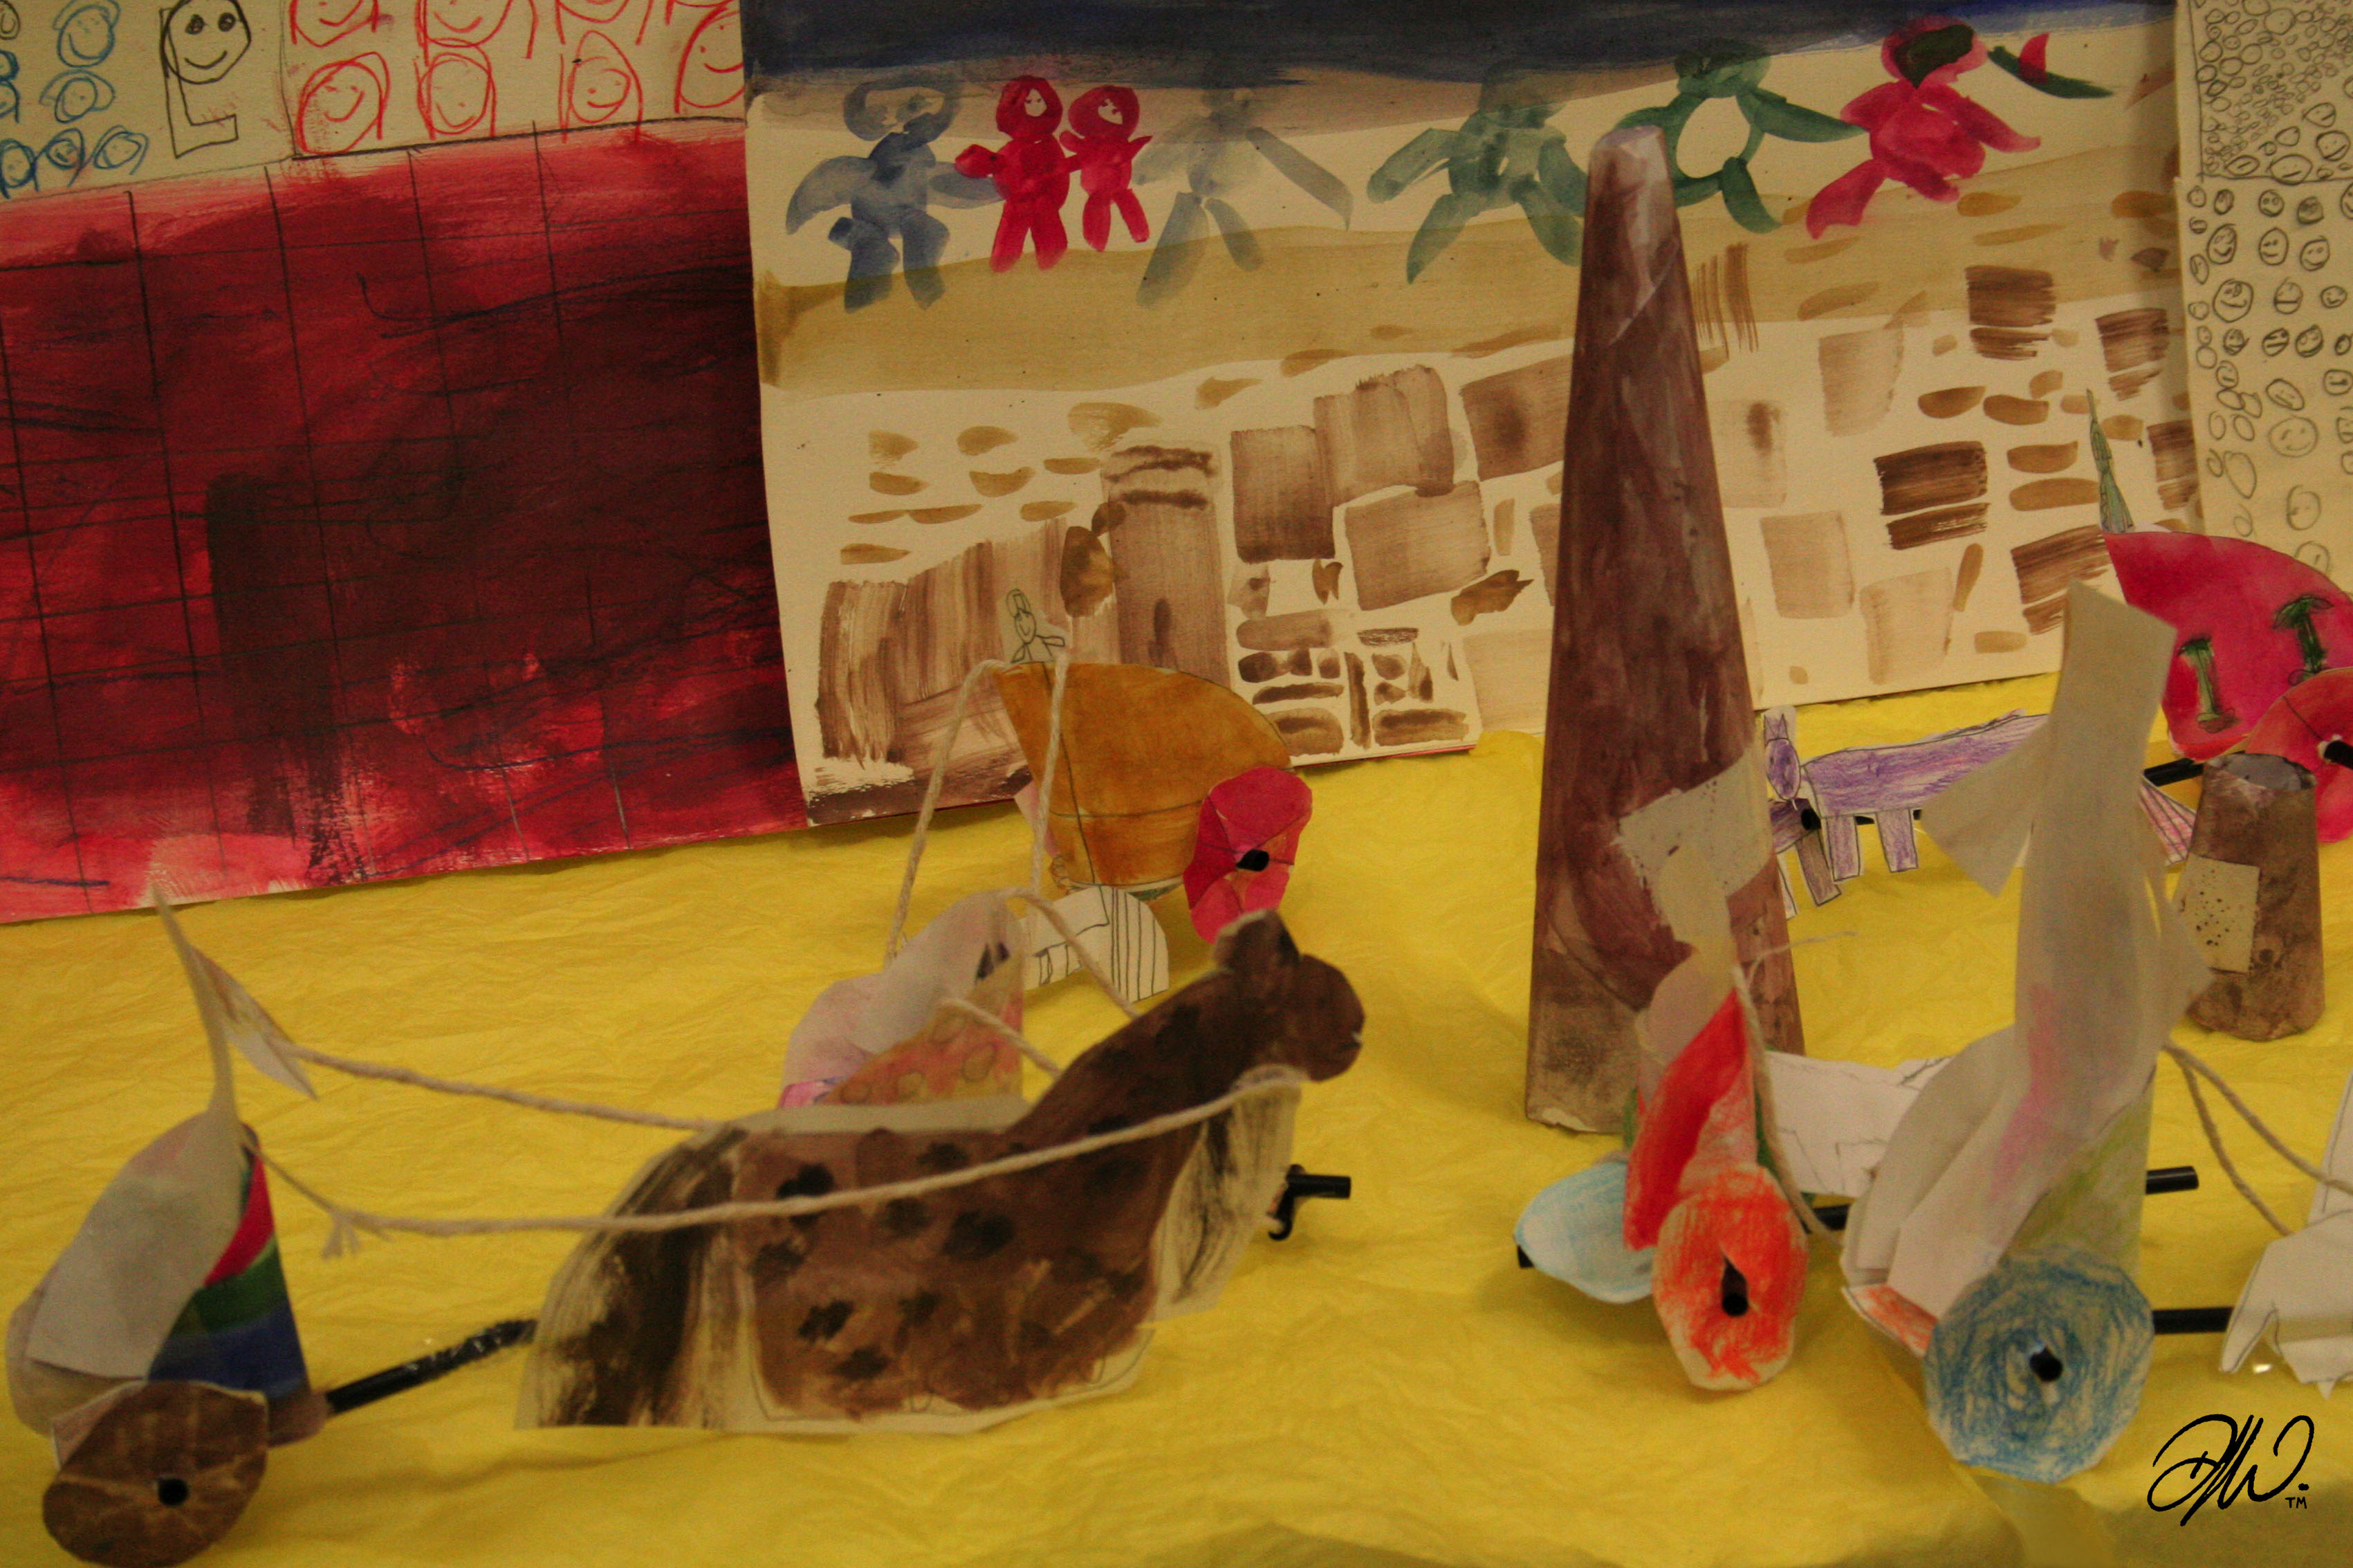 <b>Whinstone Primary School Year 3</b> - Circus Maximus Arena with Illustrated Chariot Models - 7 of 7